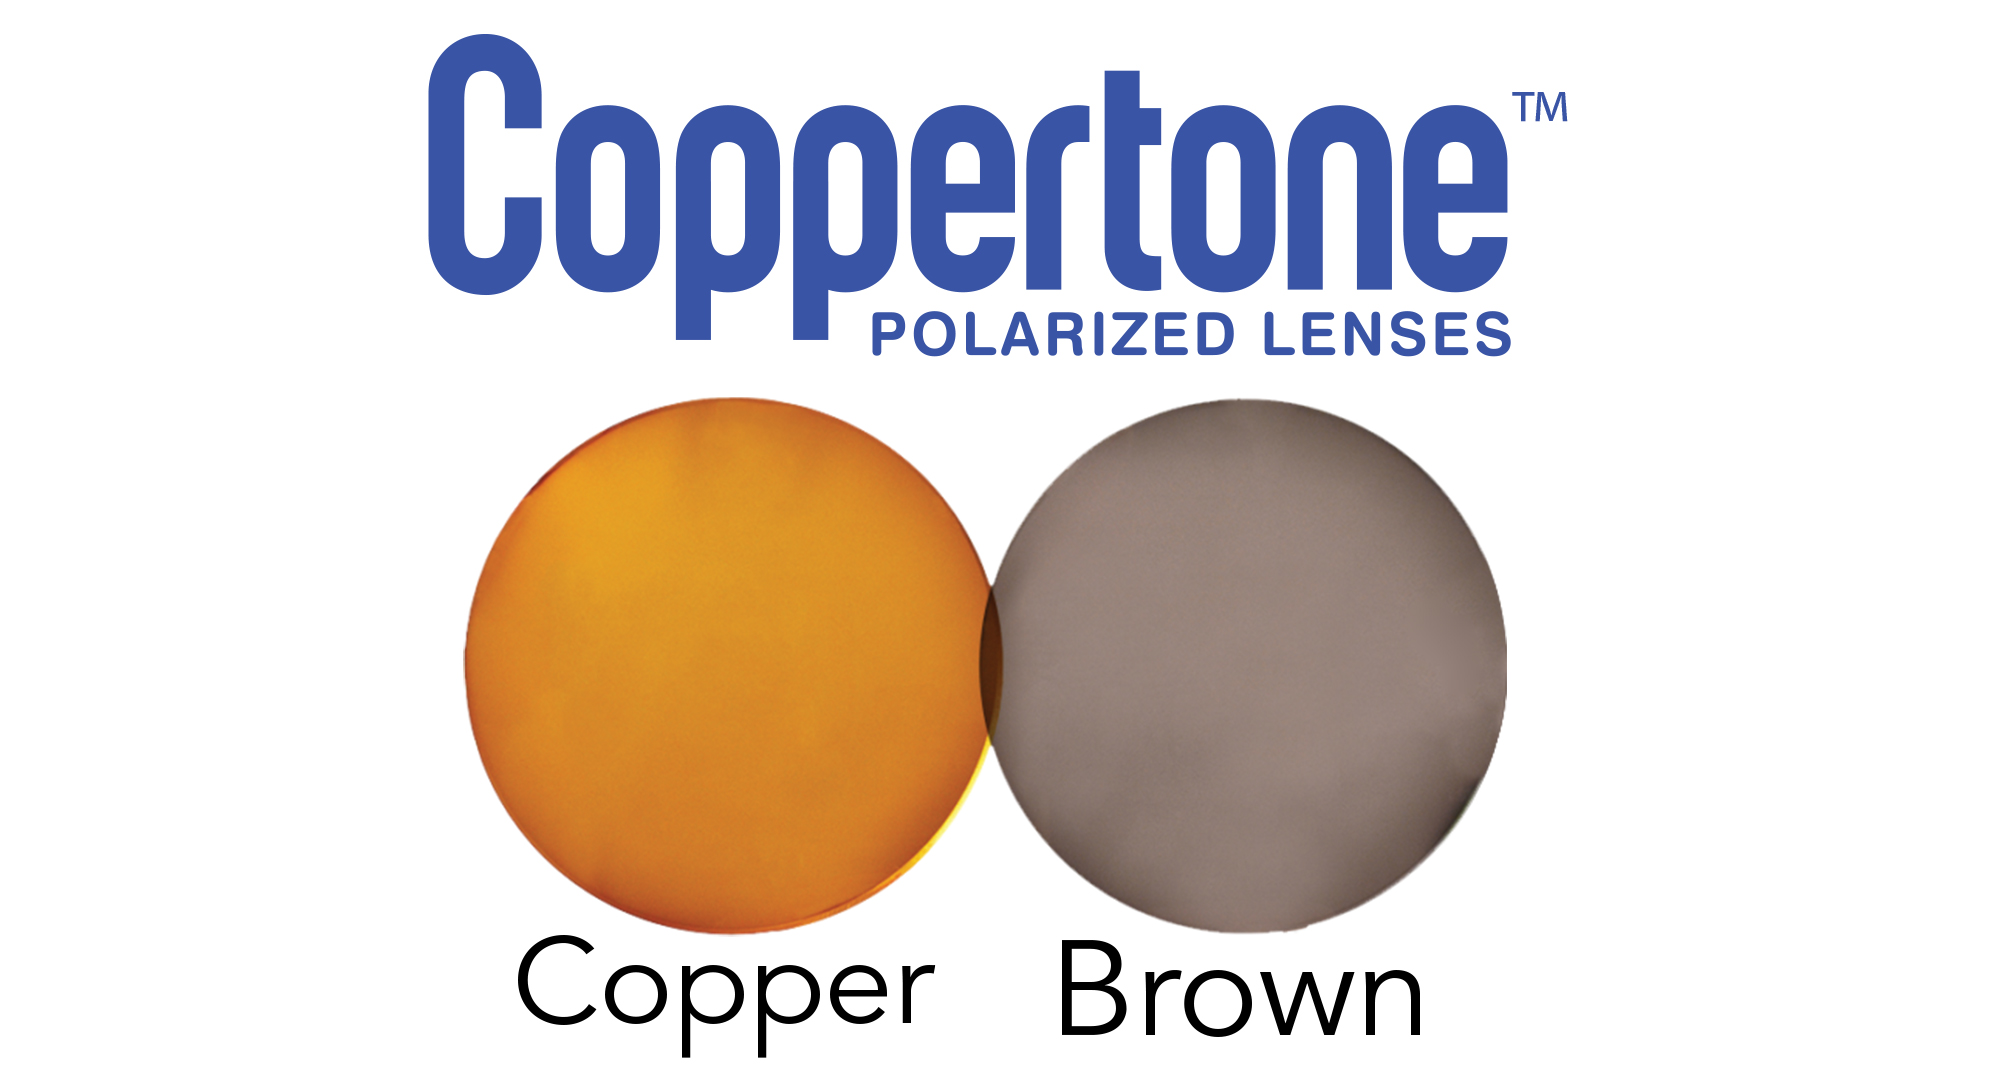 Coppertone logo with lens colors